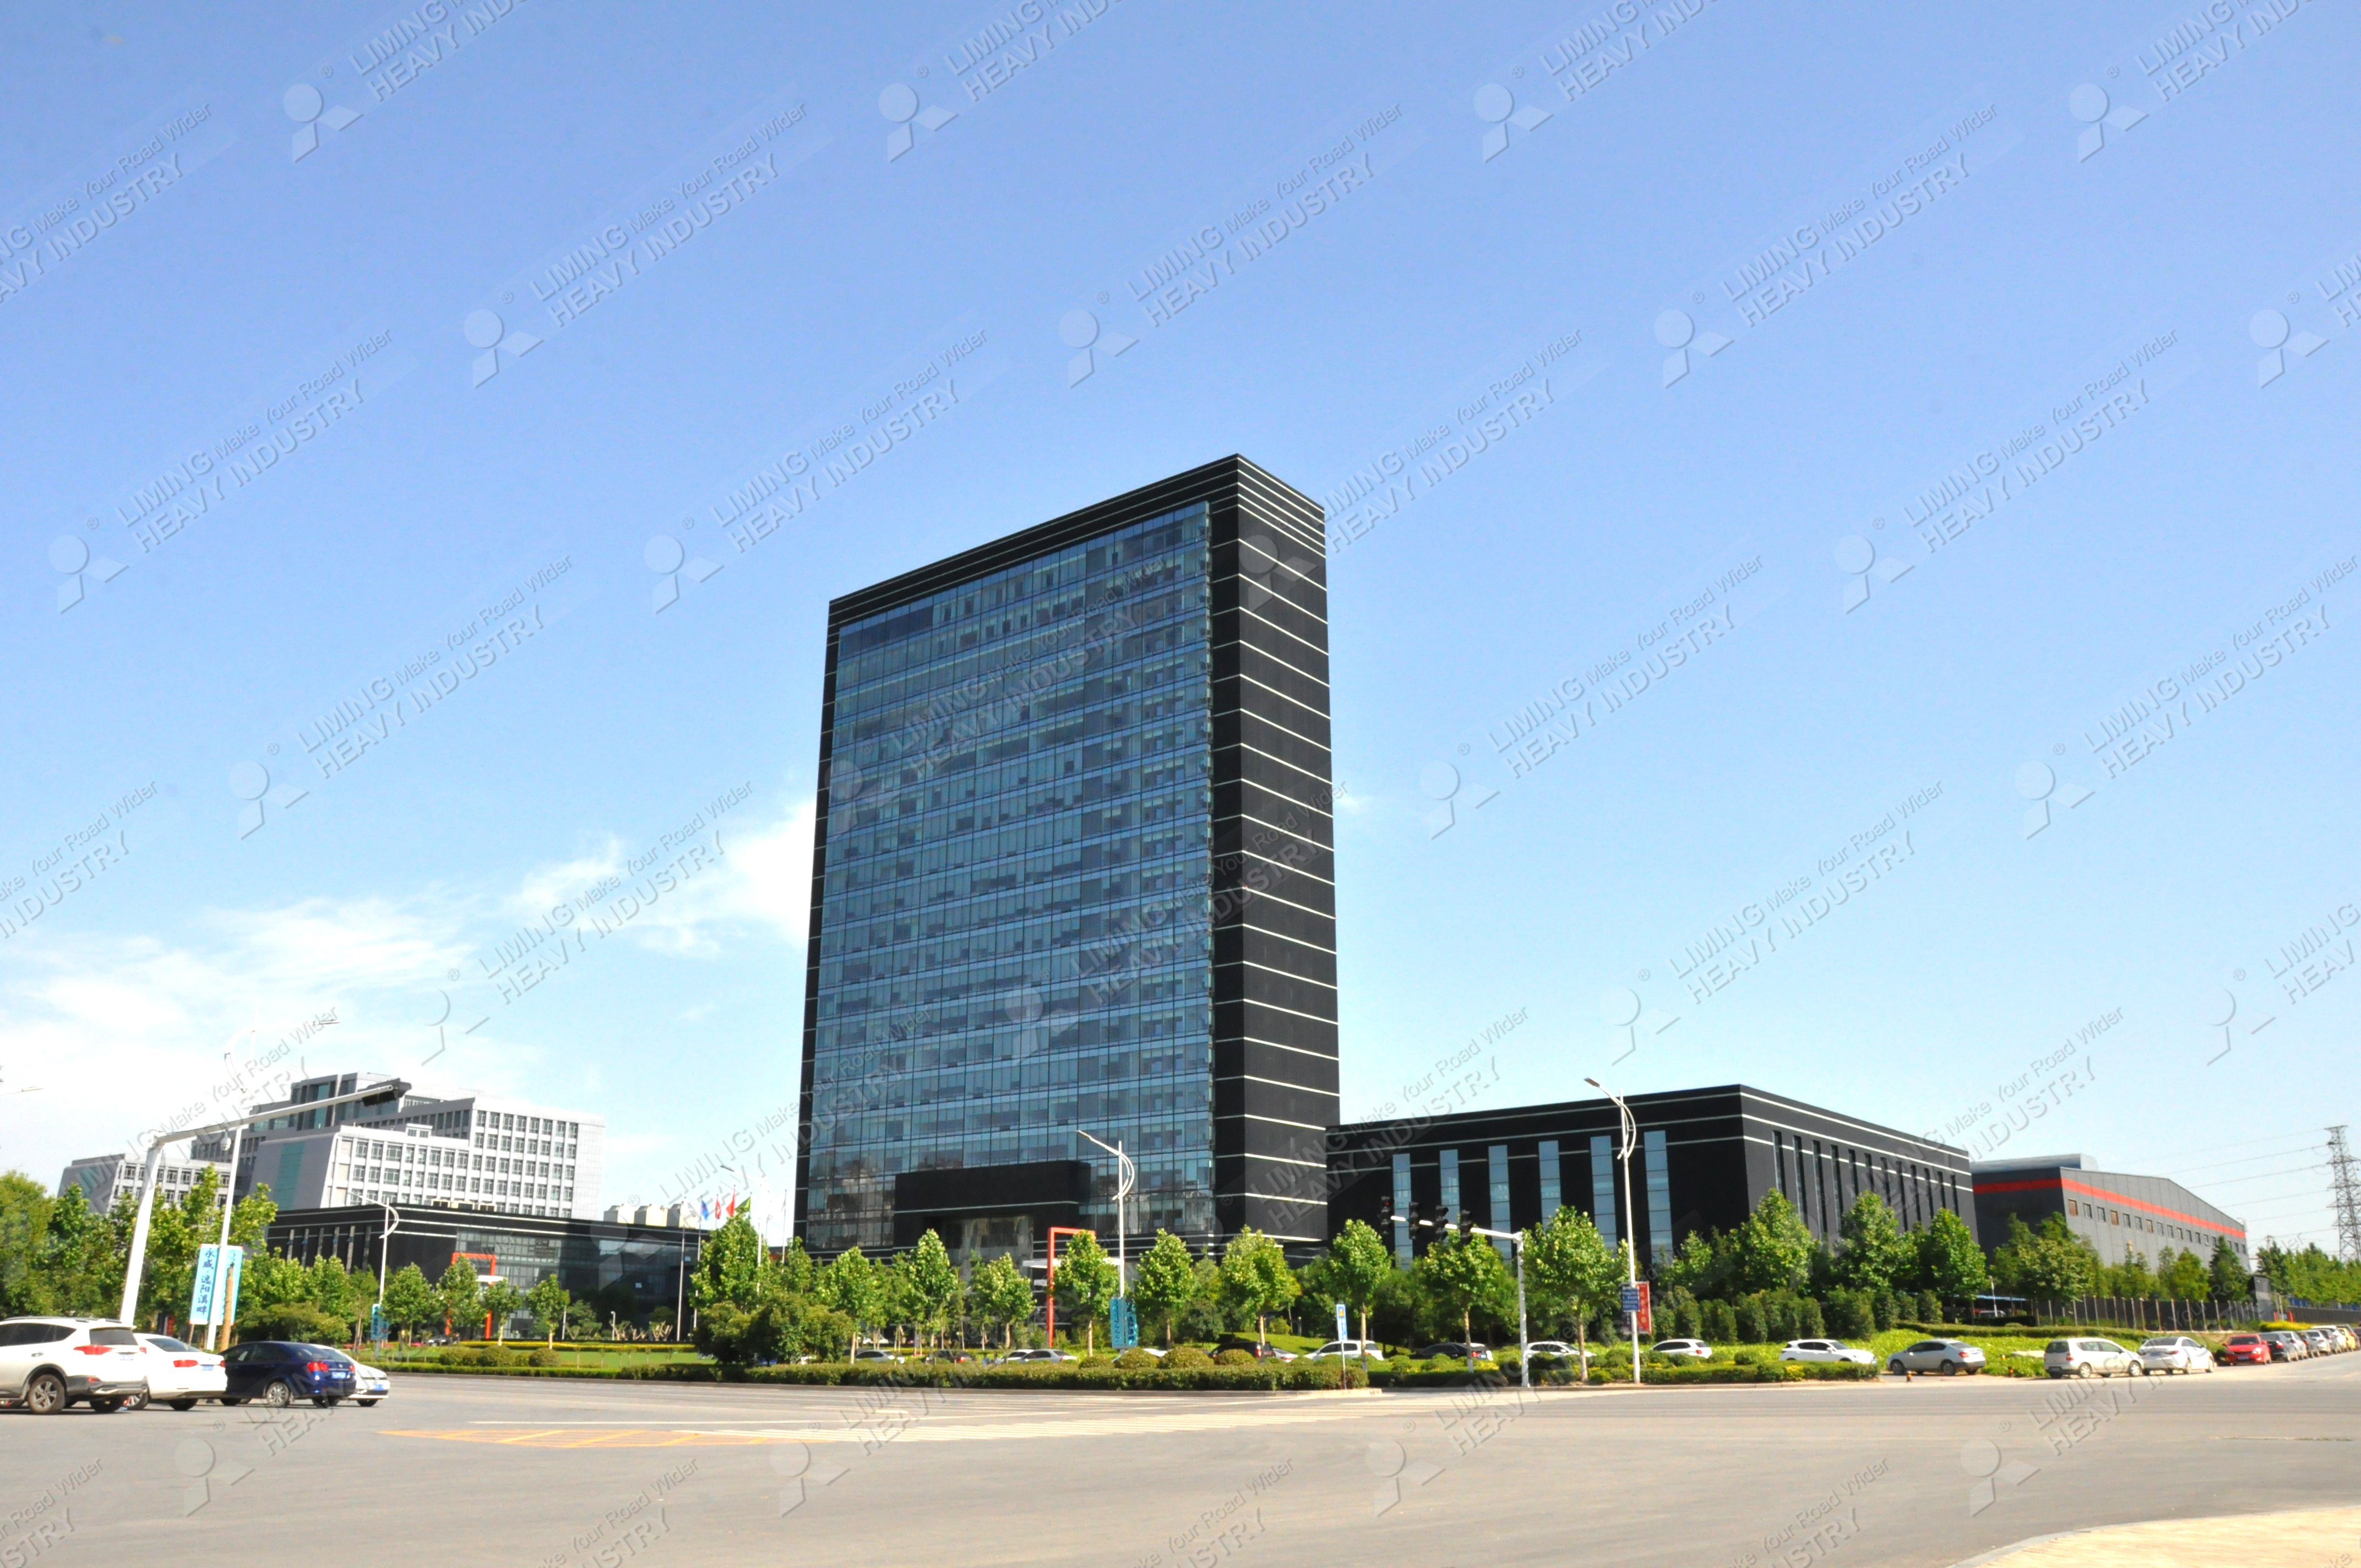 Liming Heavy Industry Science and Technology Headquarters Building